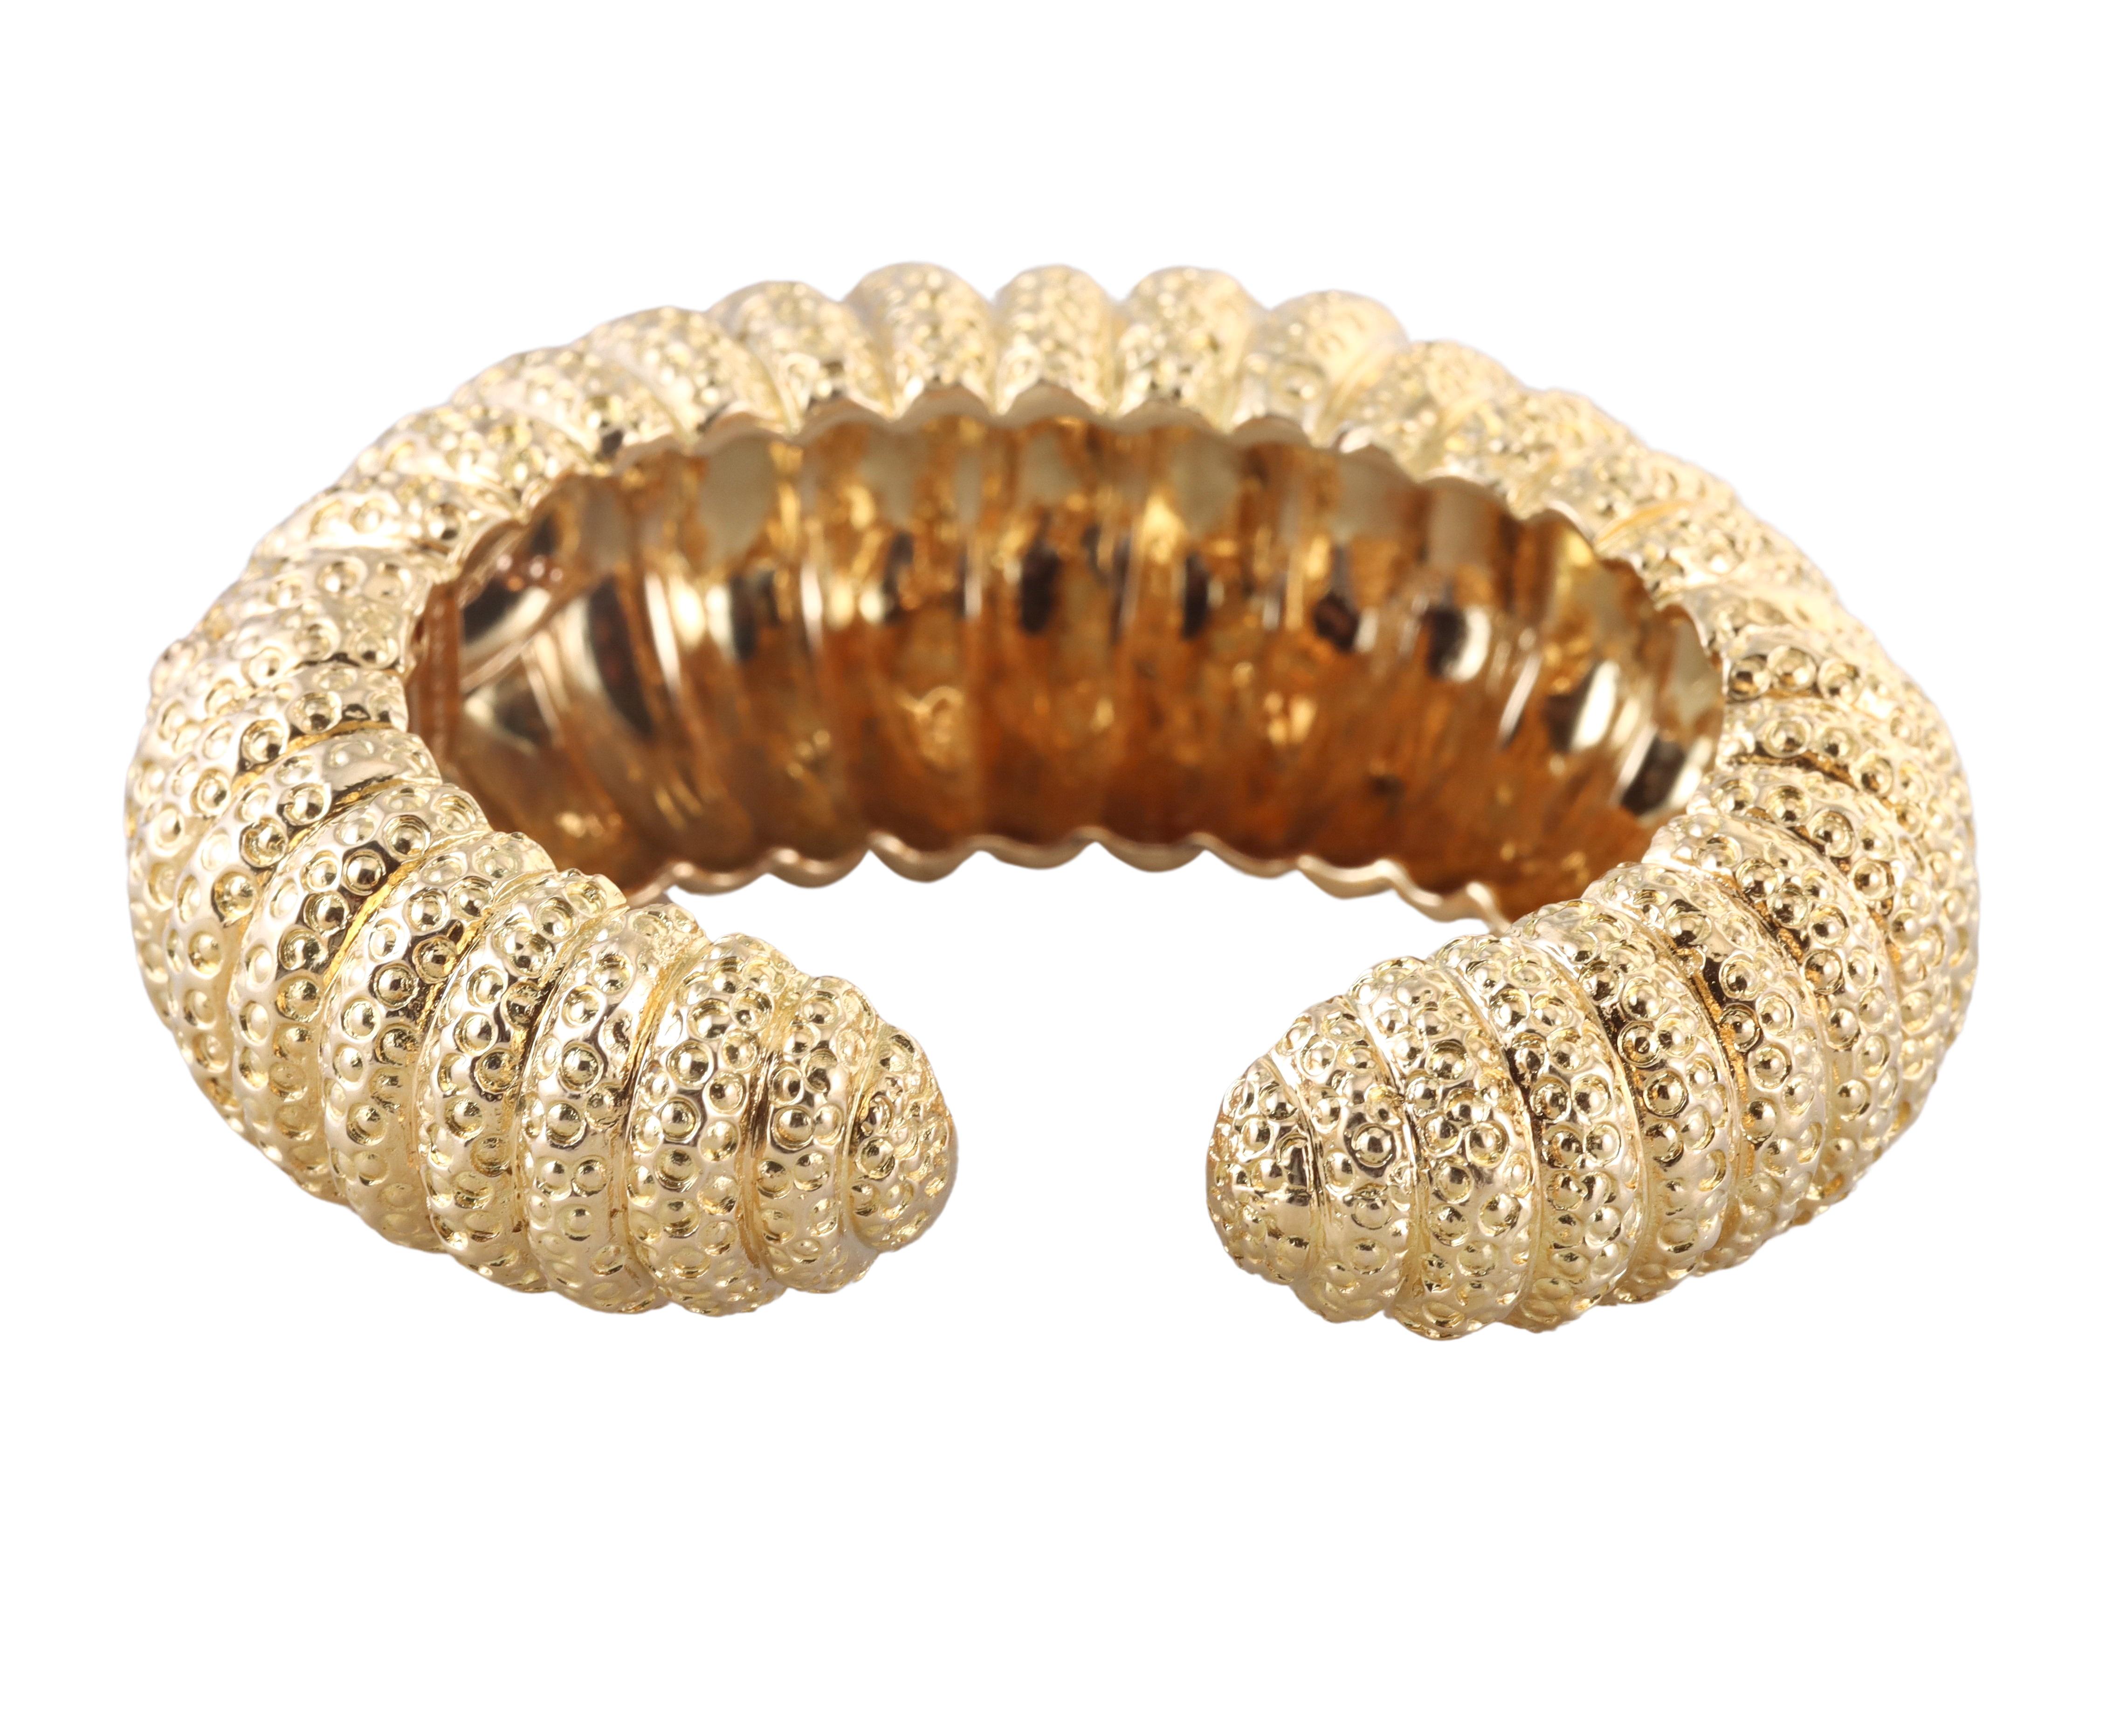 David Webb Sea Urchin Gold Cuff Bracelet In Excellent Condition For Sale In New York, NY